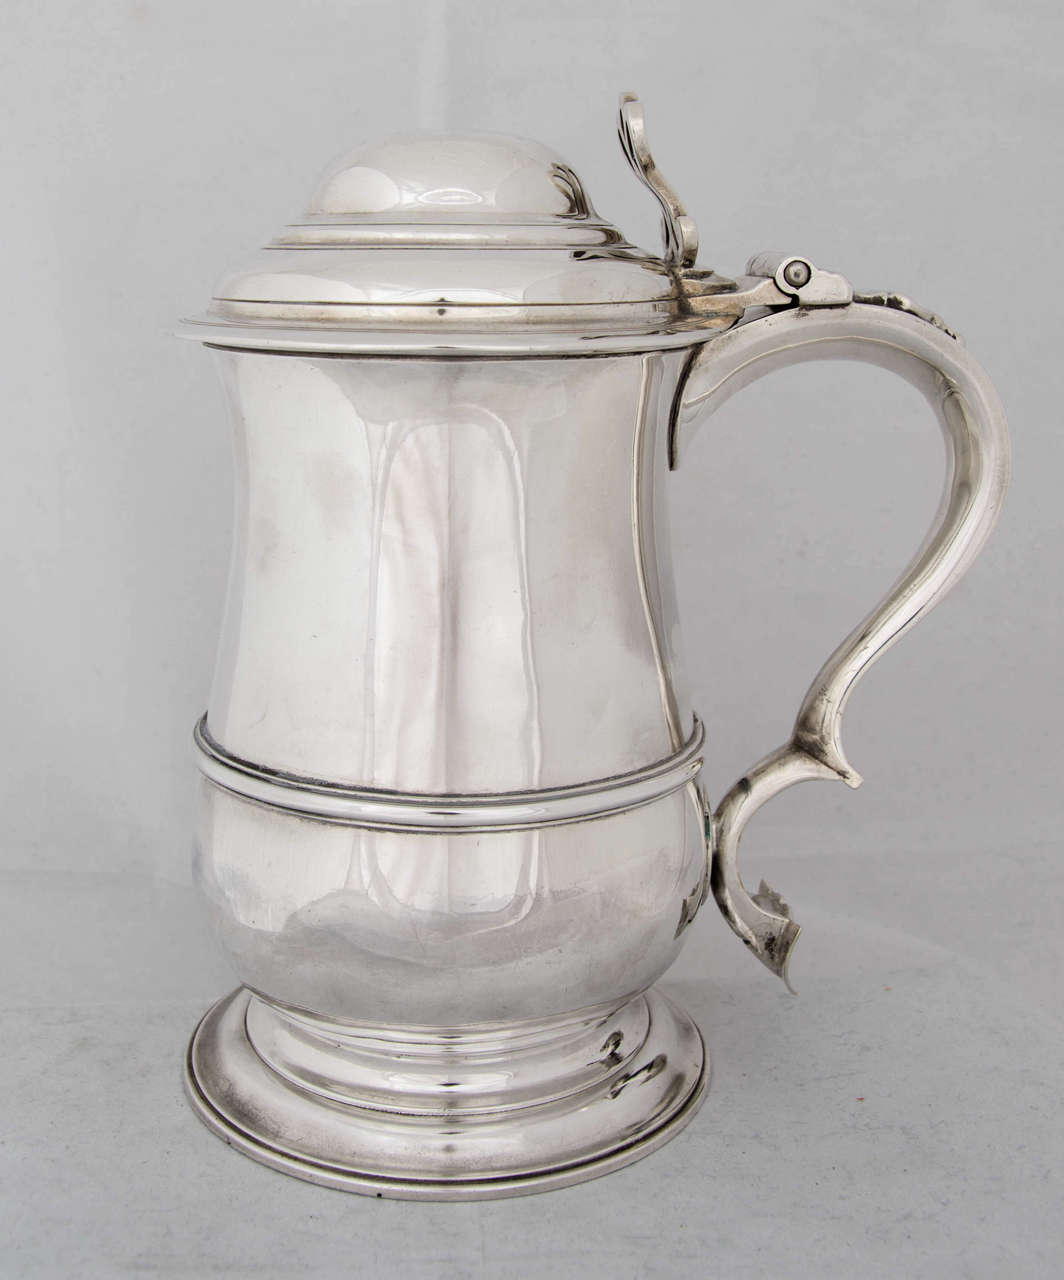 A George III sterling silver tankard made in London, 1765 by Francis Crump.
The handle is engraved with the initials of the original owner, 